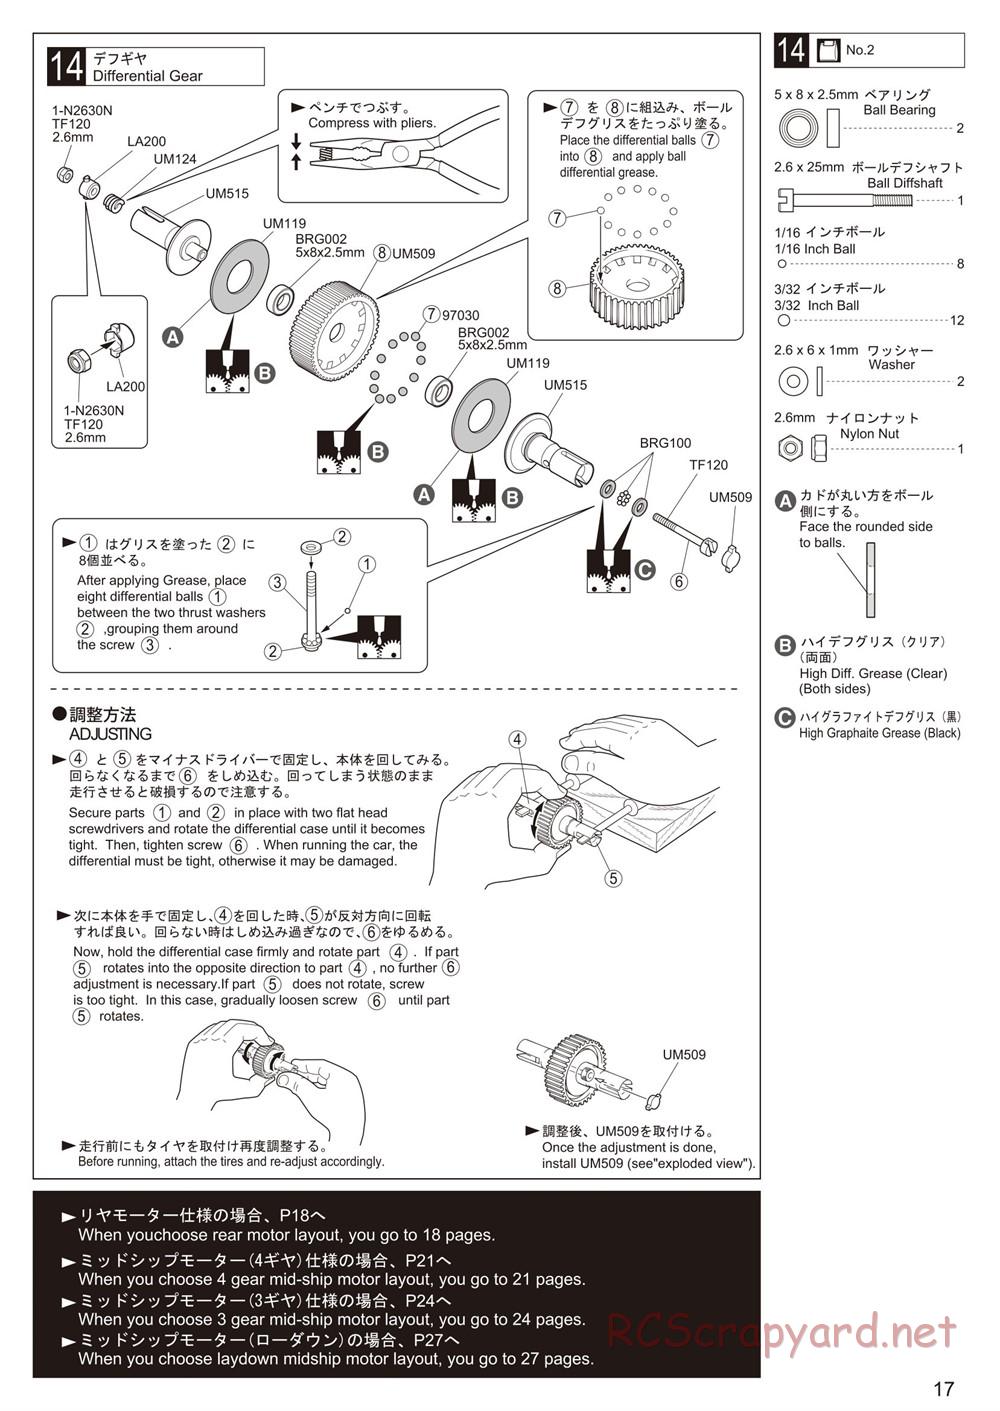 Kyosho - Ultima RB6.6 - Manual - Page 17